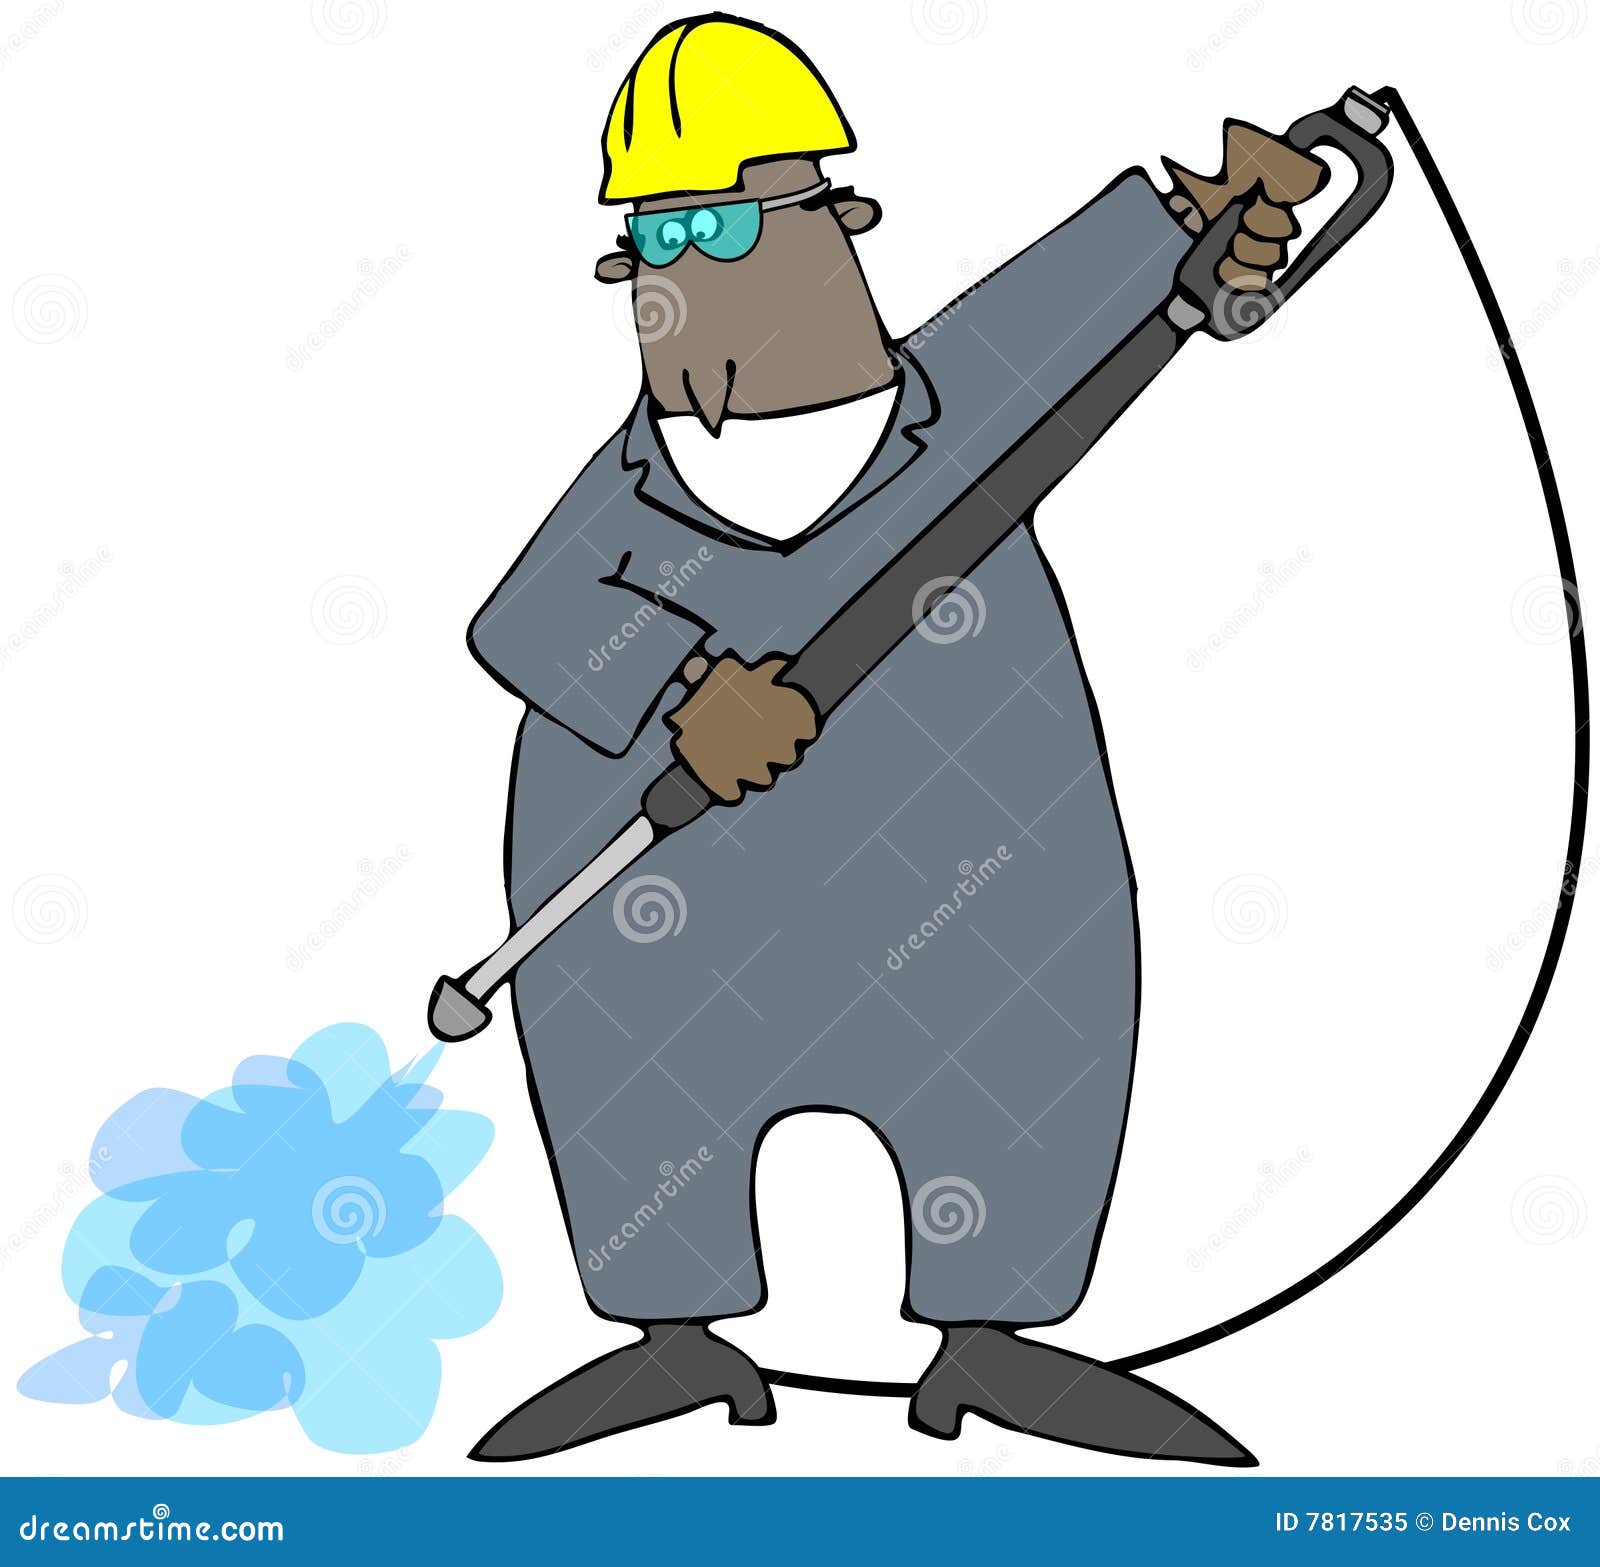 power washer clipart - photo #16